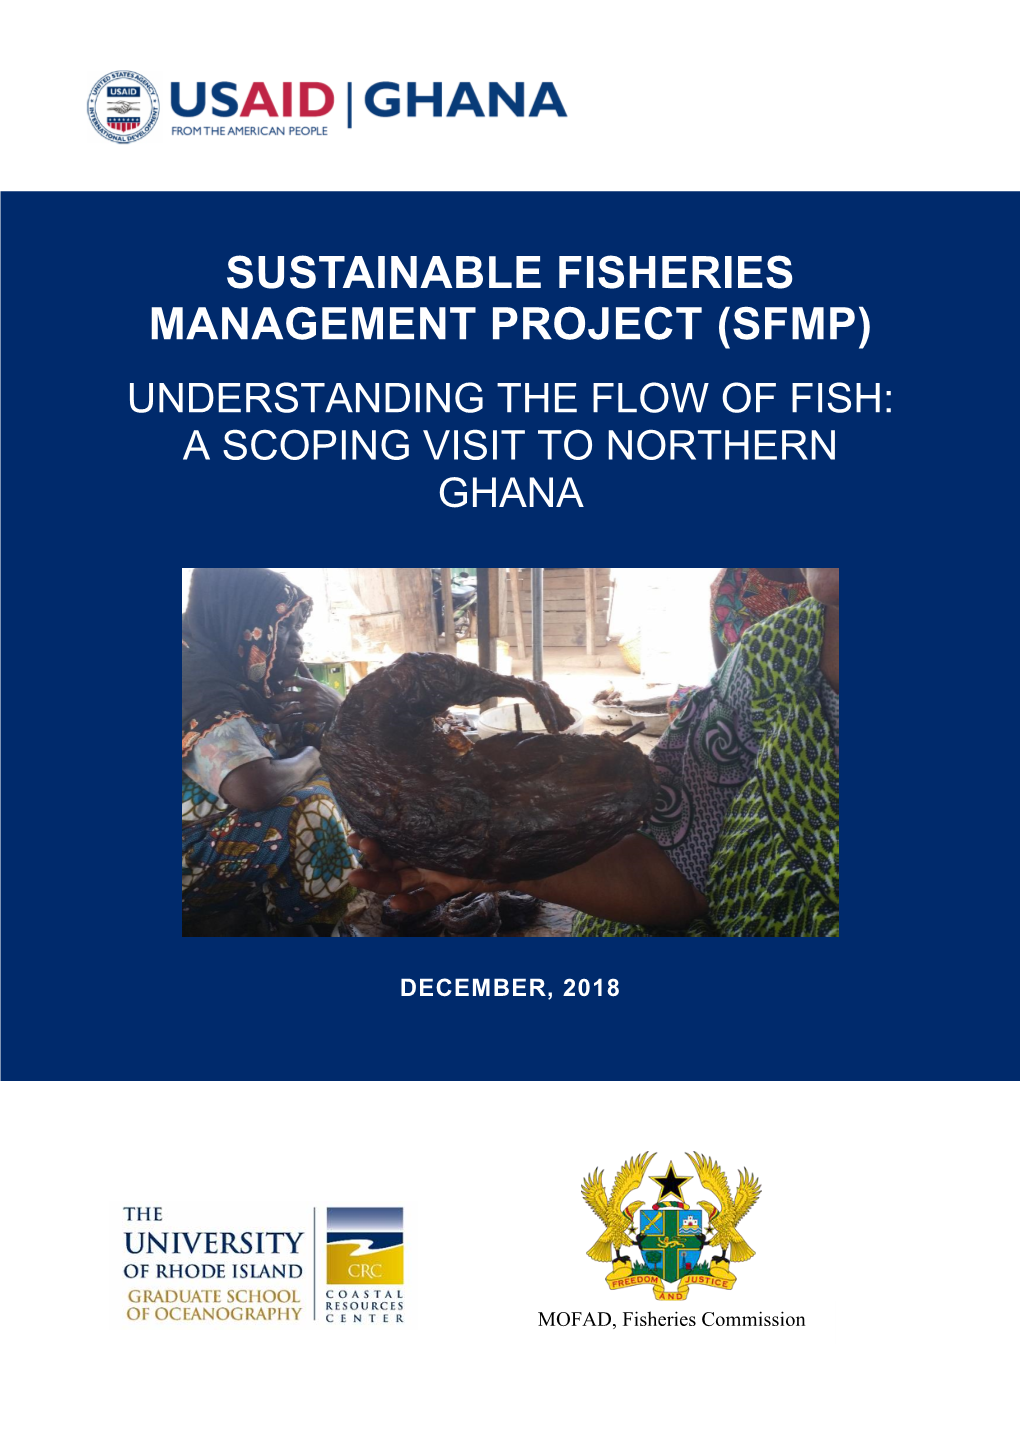 Understanding the Flow of Fish: a Scoping Visit to Northern Ghana